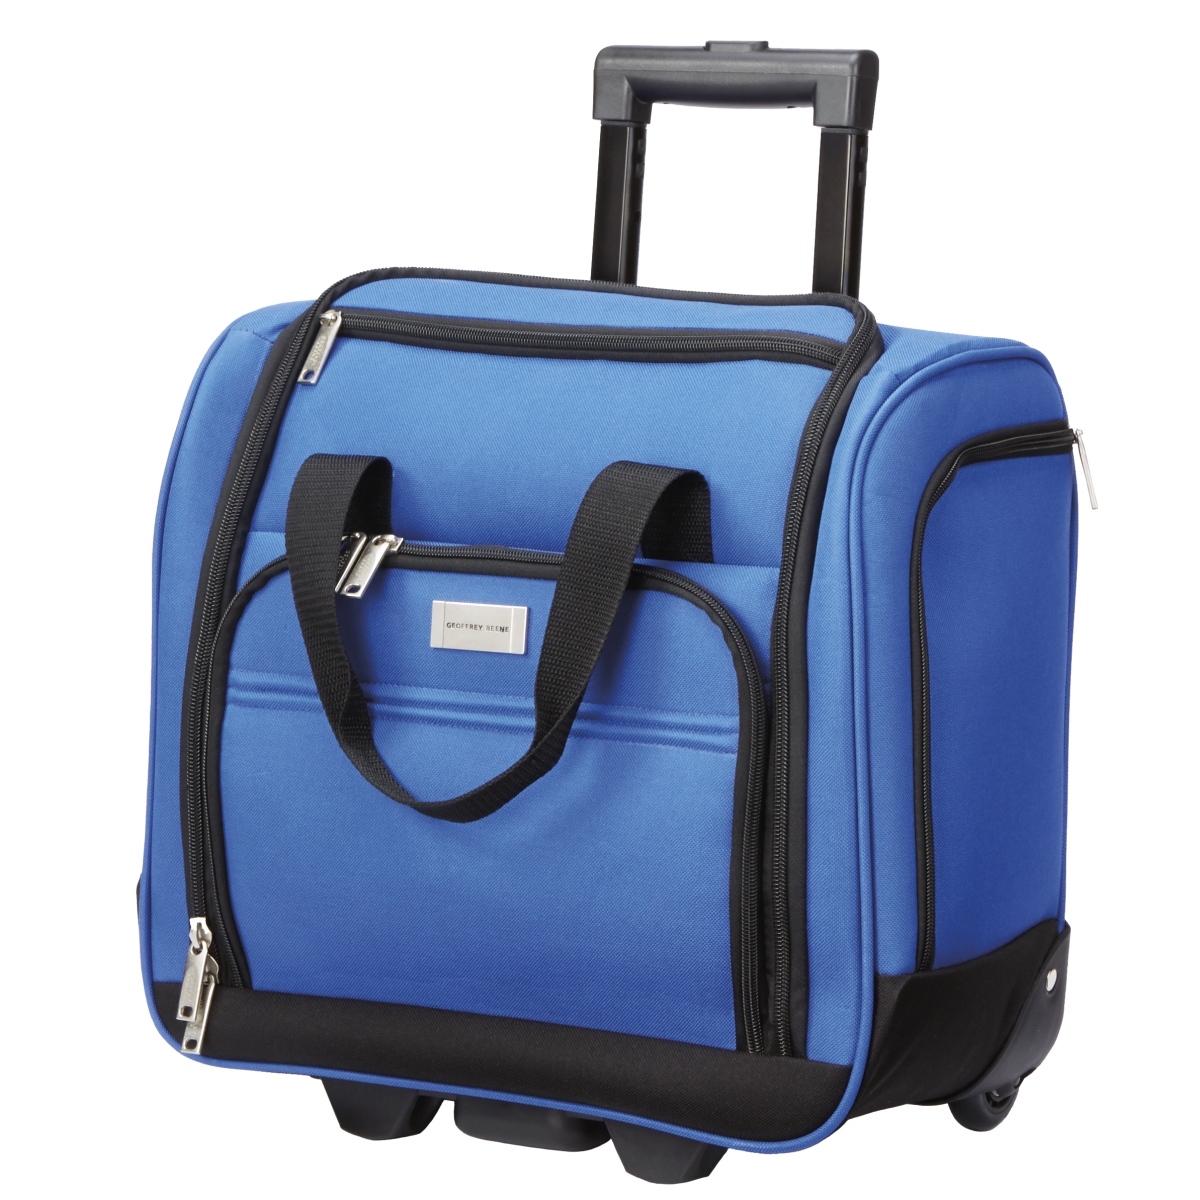 Gb1490-16 16 In. Underseater Travel Carry-on Bag, Royal Blue